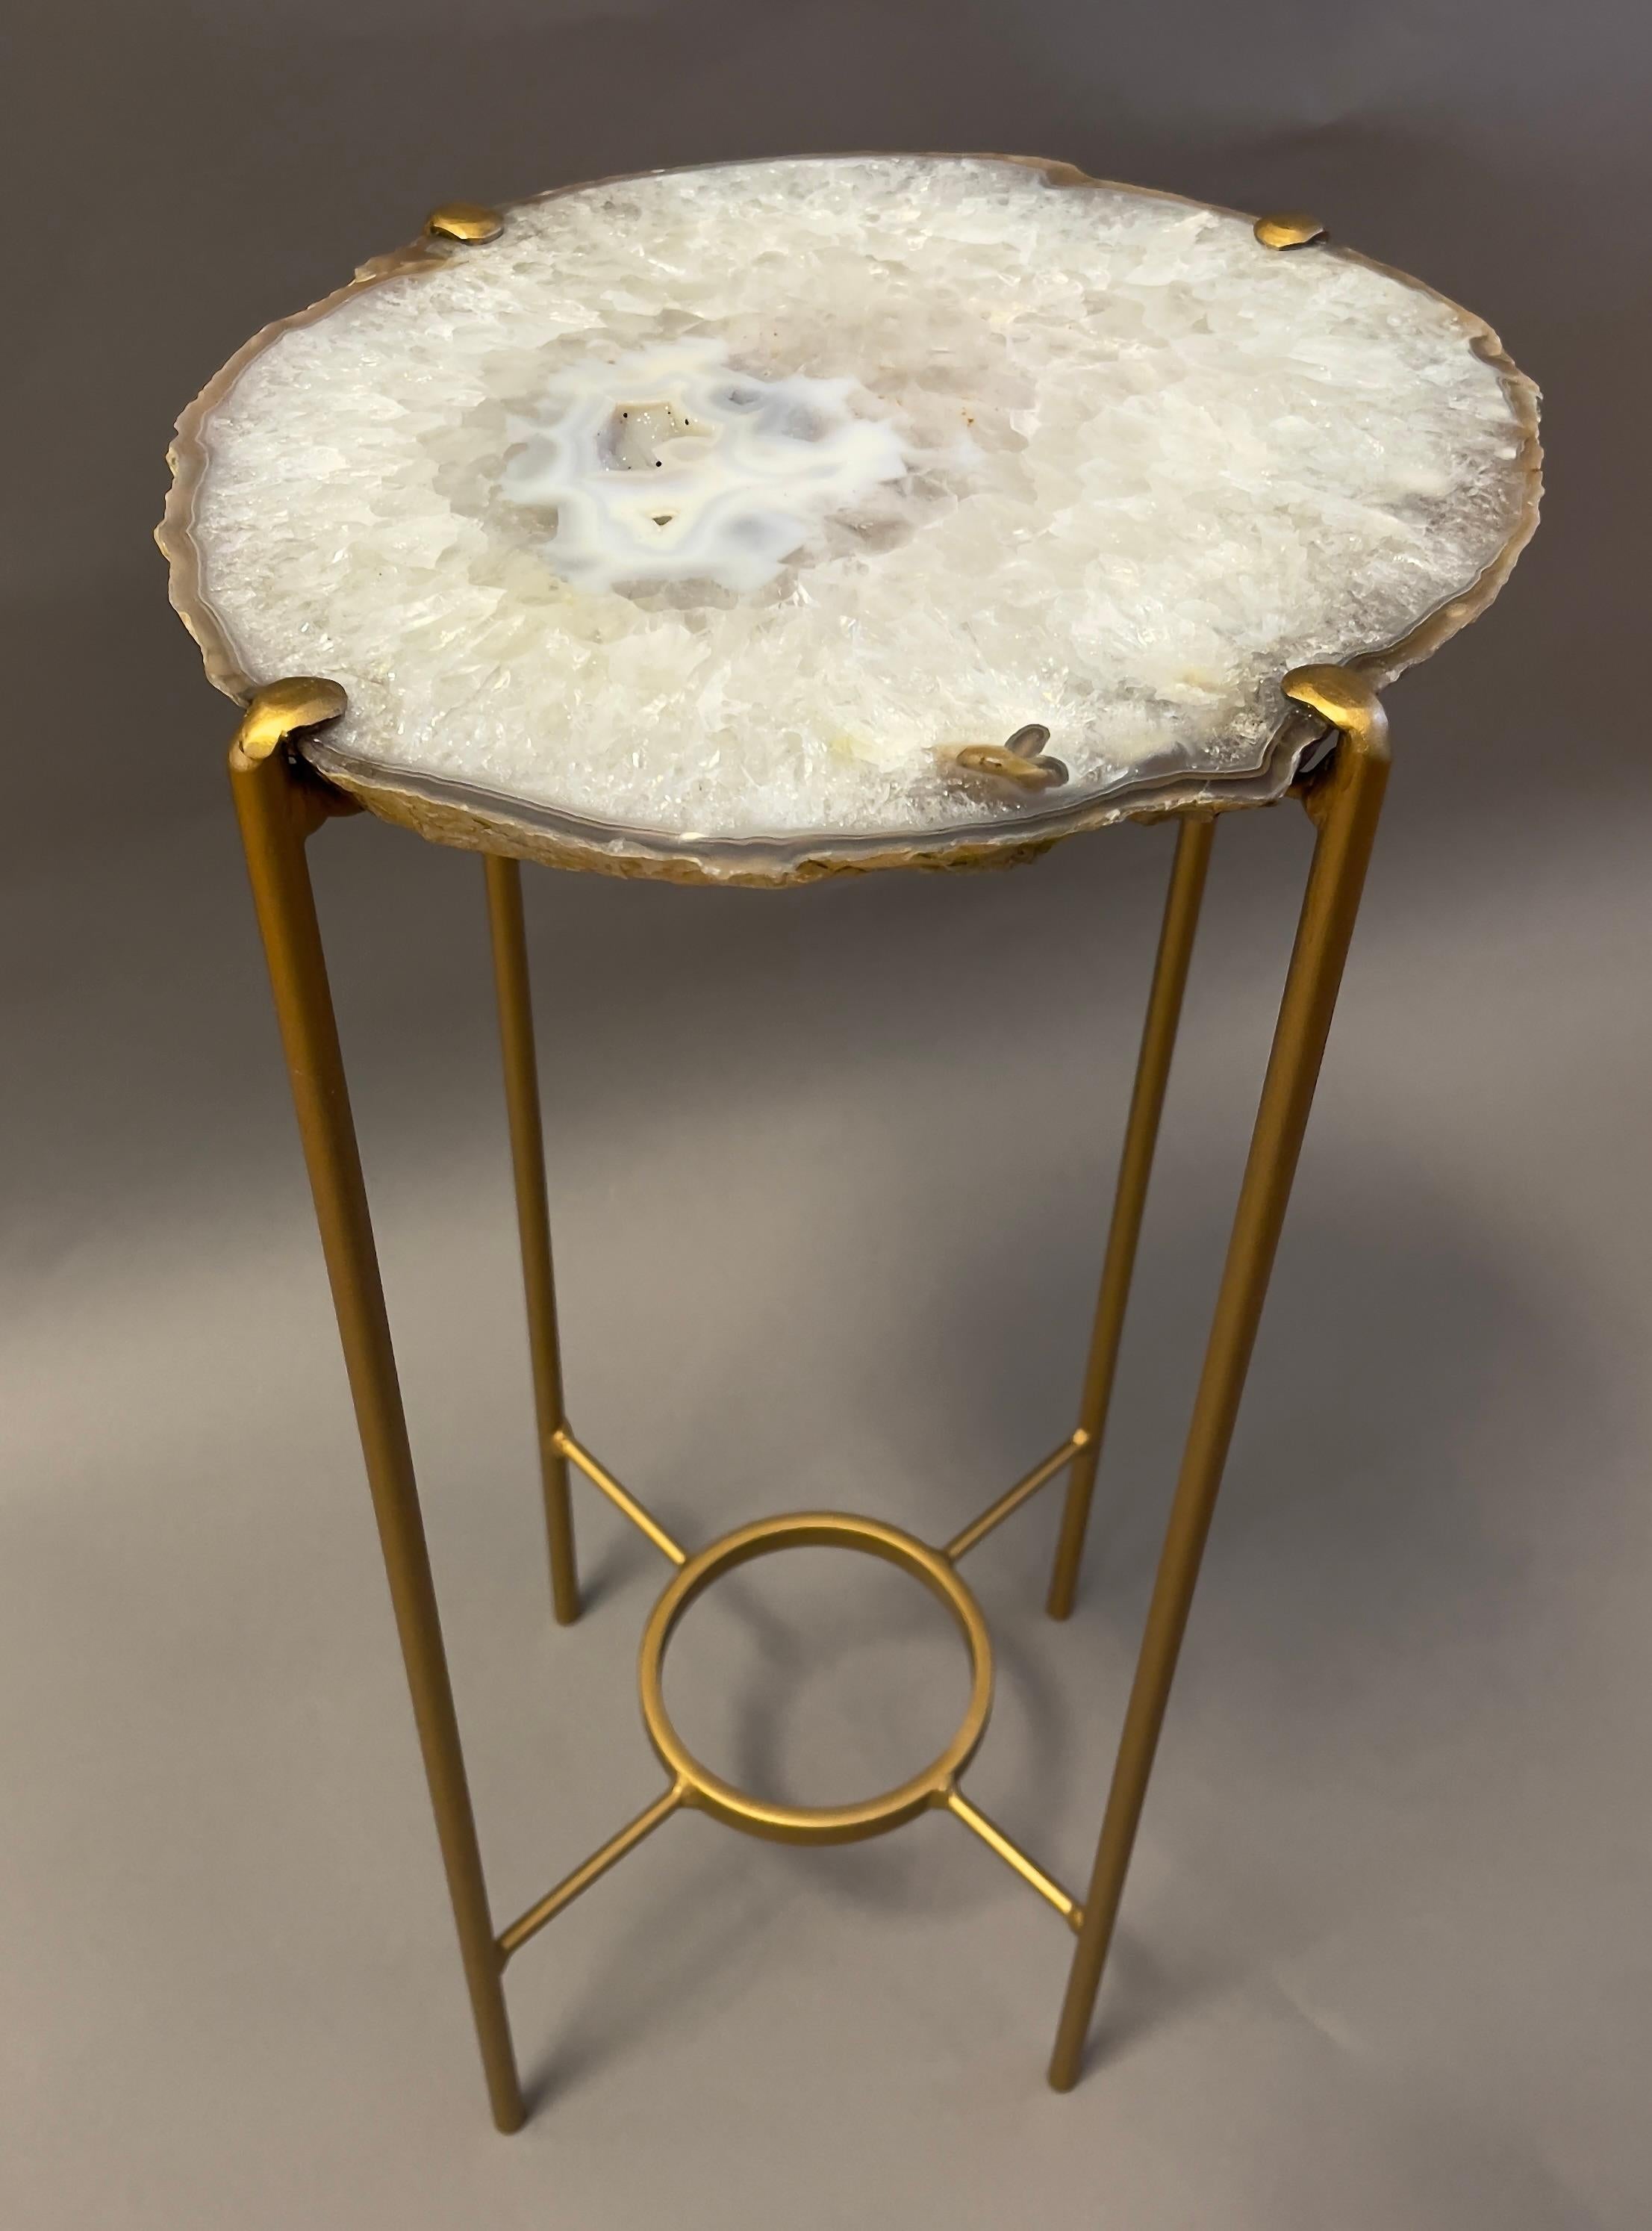 Unusual Modern Handcrafted Geode Table 1